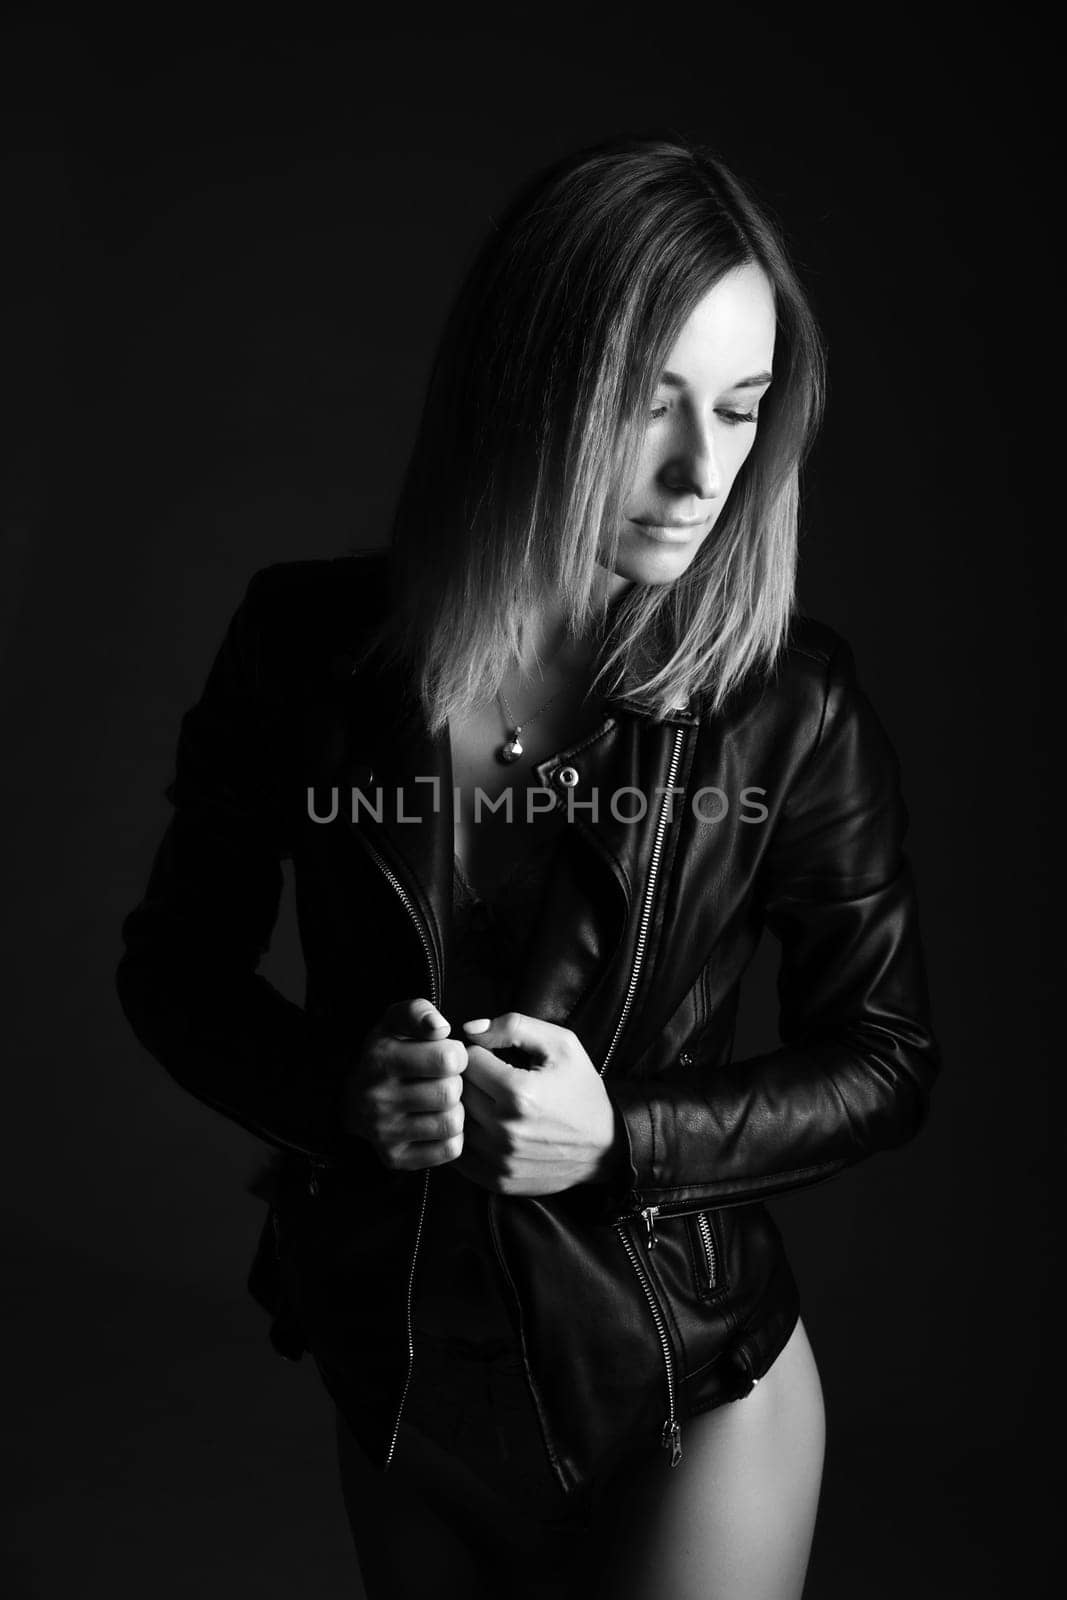 Portrait of a woman in a leather jacket and lingerie, black and white photo. Beautiful caucasian woman of nationality sensitive portrait on black background